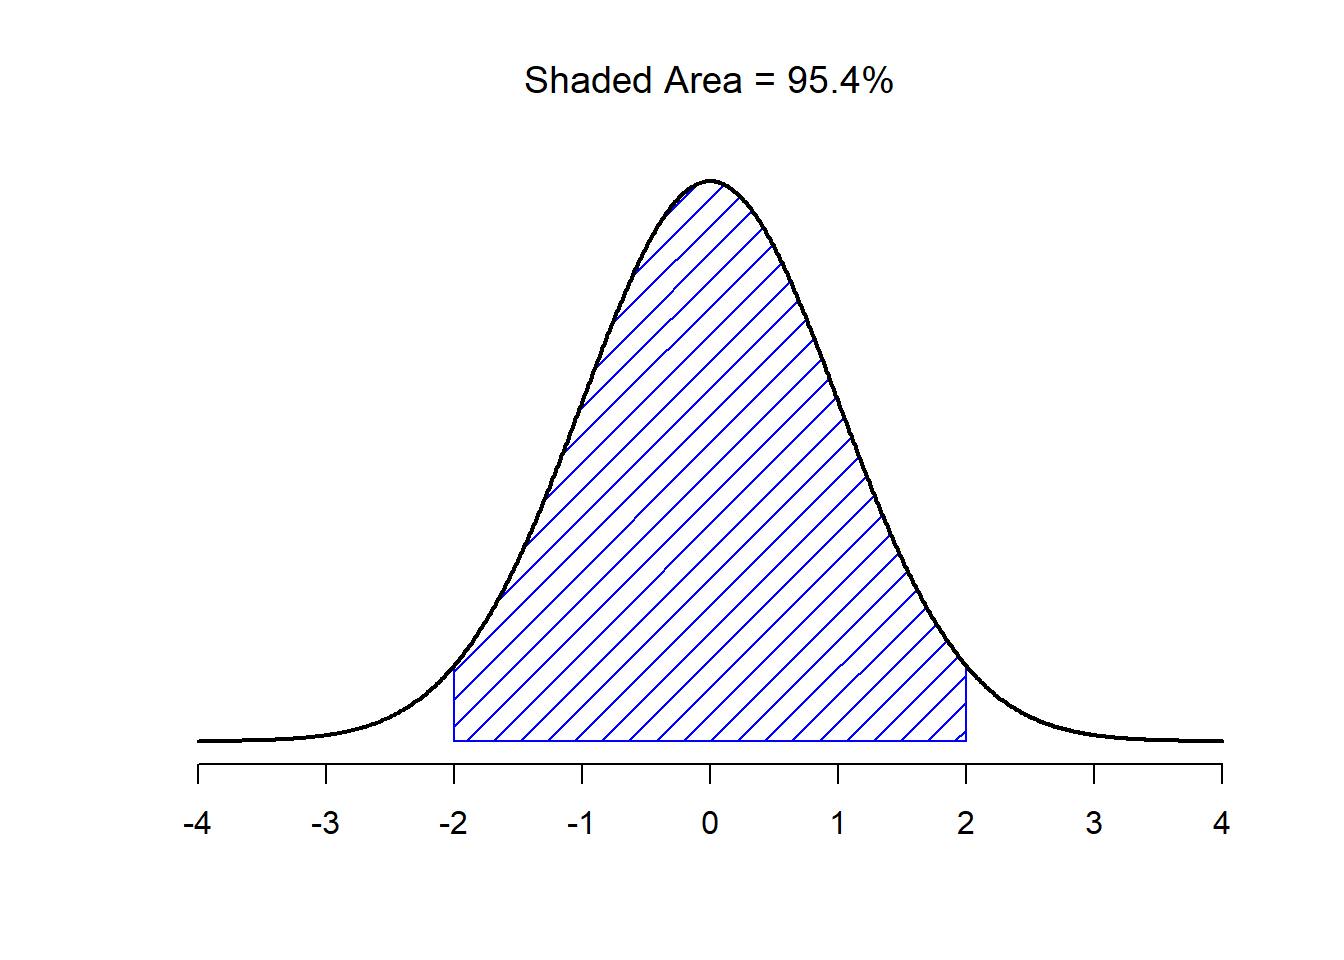 The area under the curve tells you the probability that an observation falls within a particular range. The solid lines plot normal distributions with mean $mu=0$ and standard deviation $sigma=1$. The shaded areas illustrate "areas under the curve" for two important cases. Here we see that there is a 95.4% chance that an observation will fall within two standard deviations of the mean.